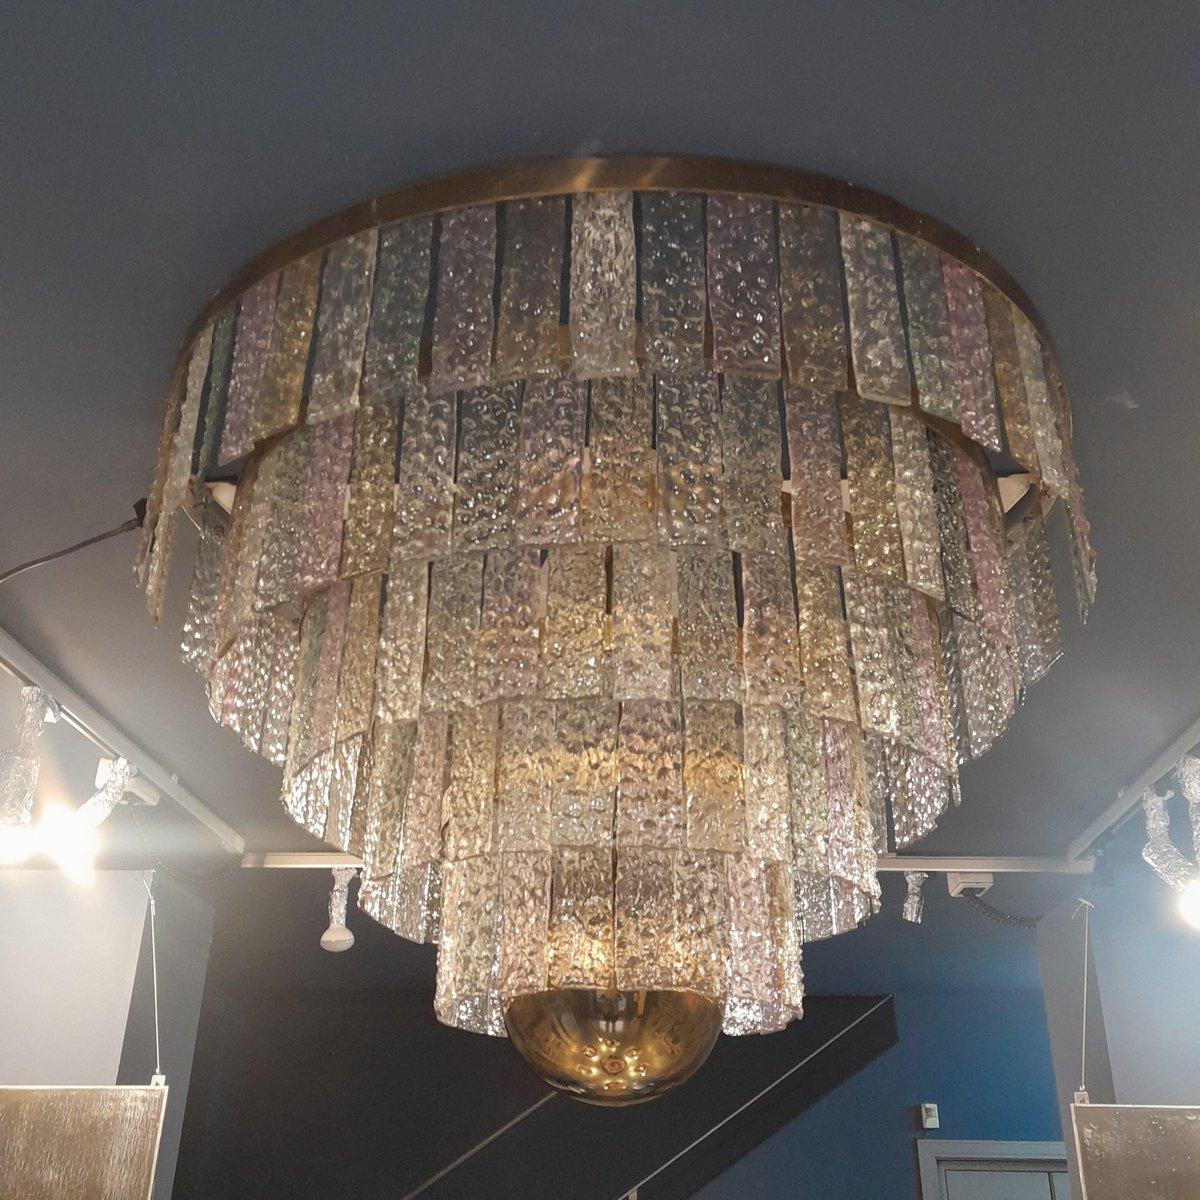 Angelo Lelii founder of the large lighting company in the 1950s helped reform and revolutionize the world of modern lighting.
This is one of the rarest and most beautiful chandeliers ever made, the entire structure is made of brass and has glass of